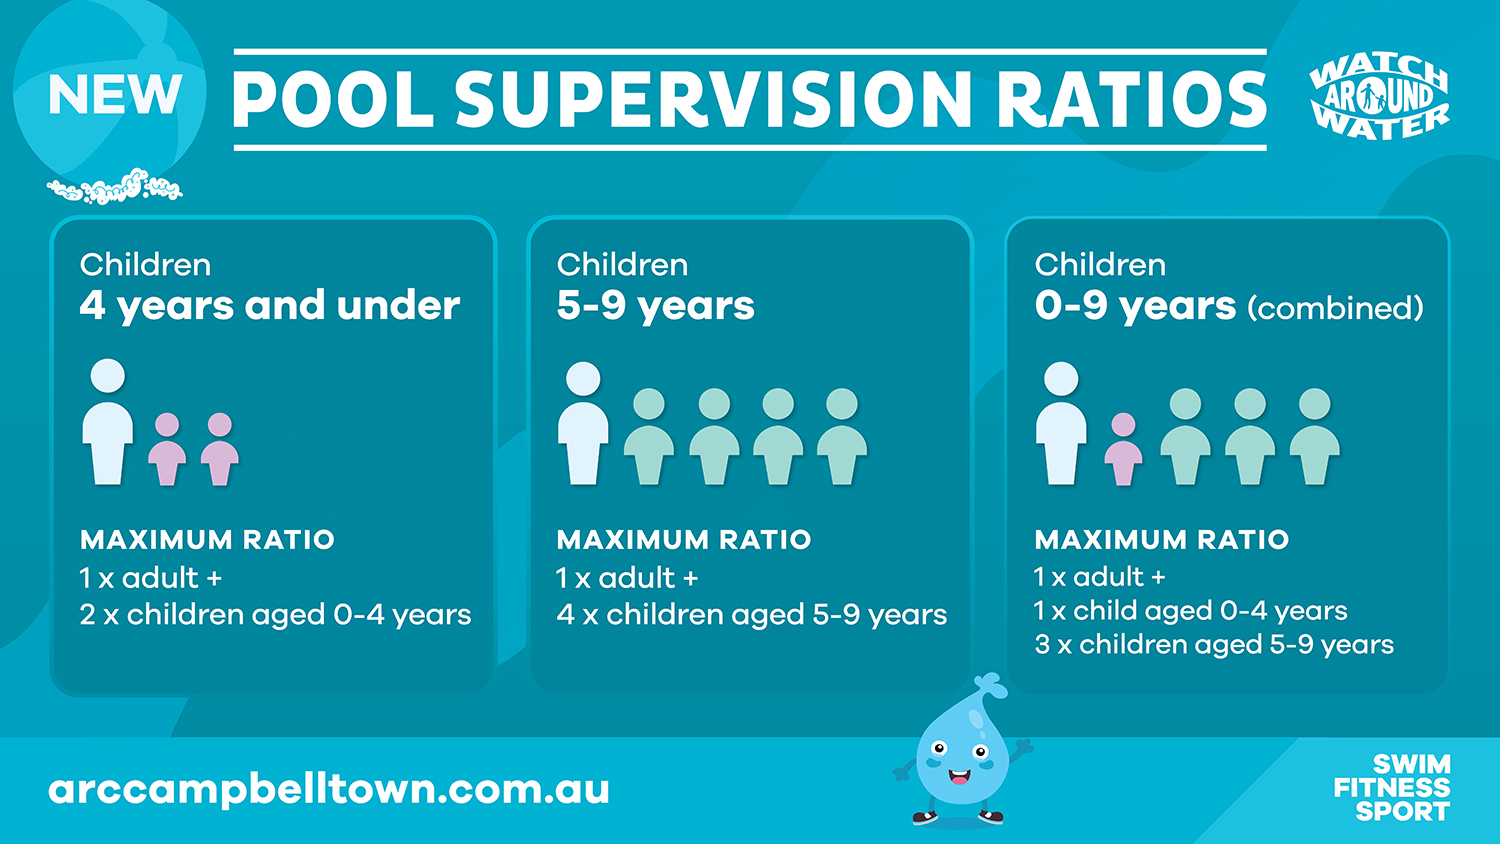 Watch Around Water Pool Supervision Ratios